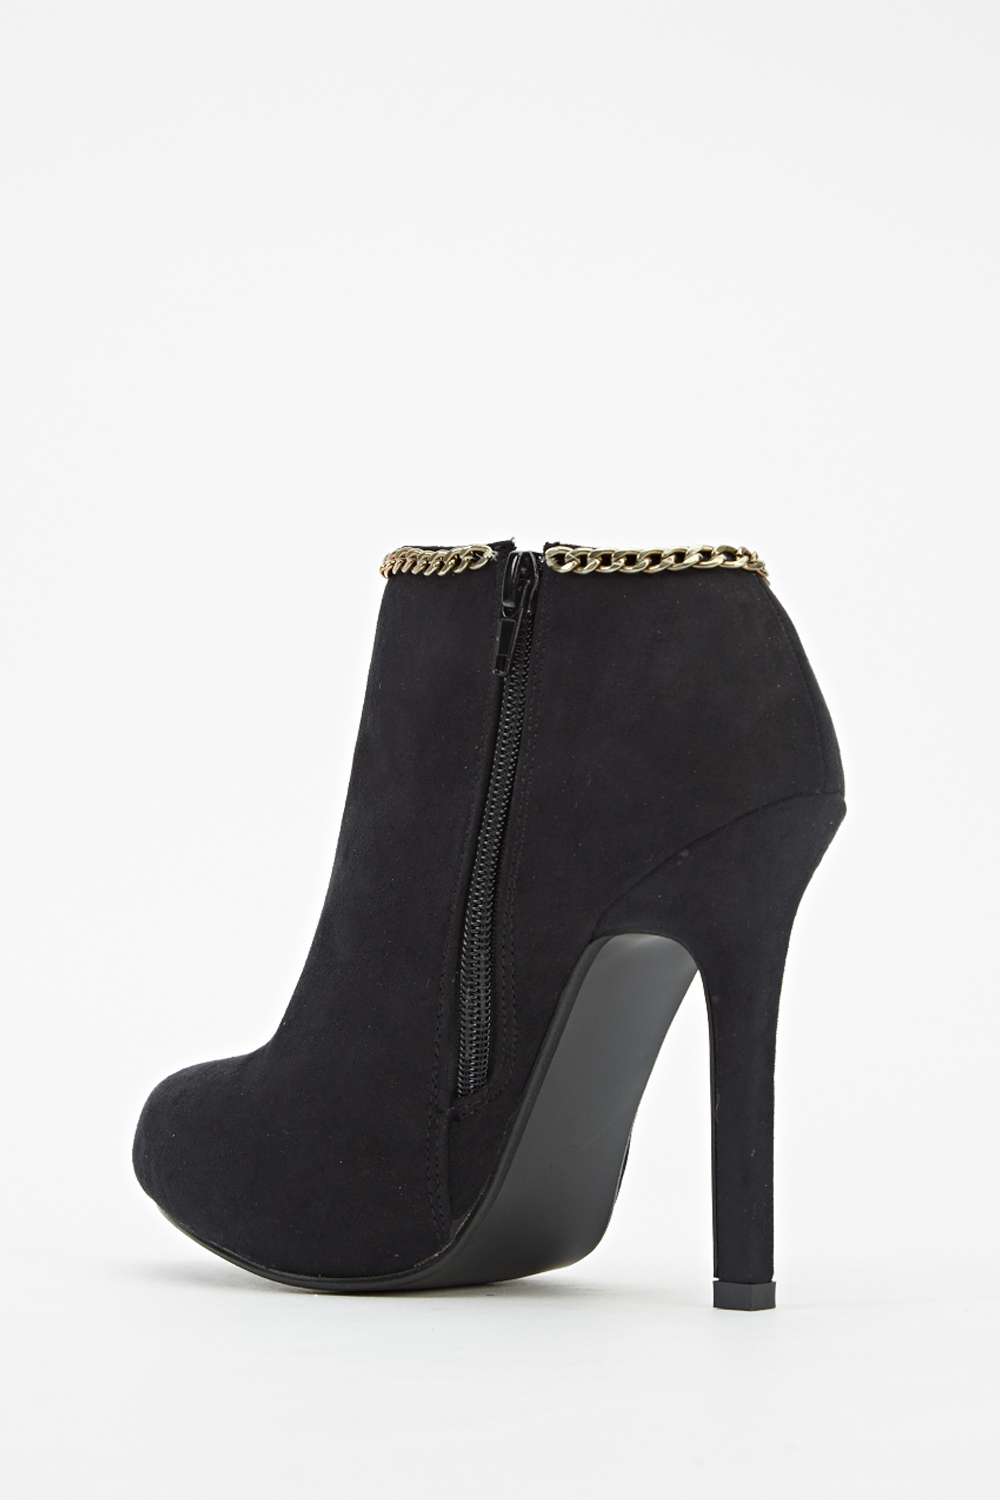 Suedette Chained Heeled Boots - Just $7